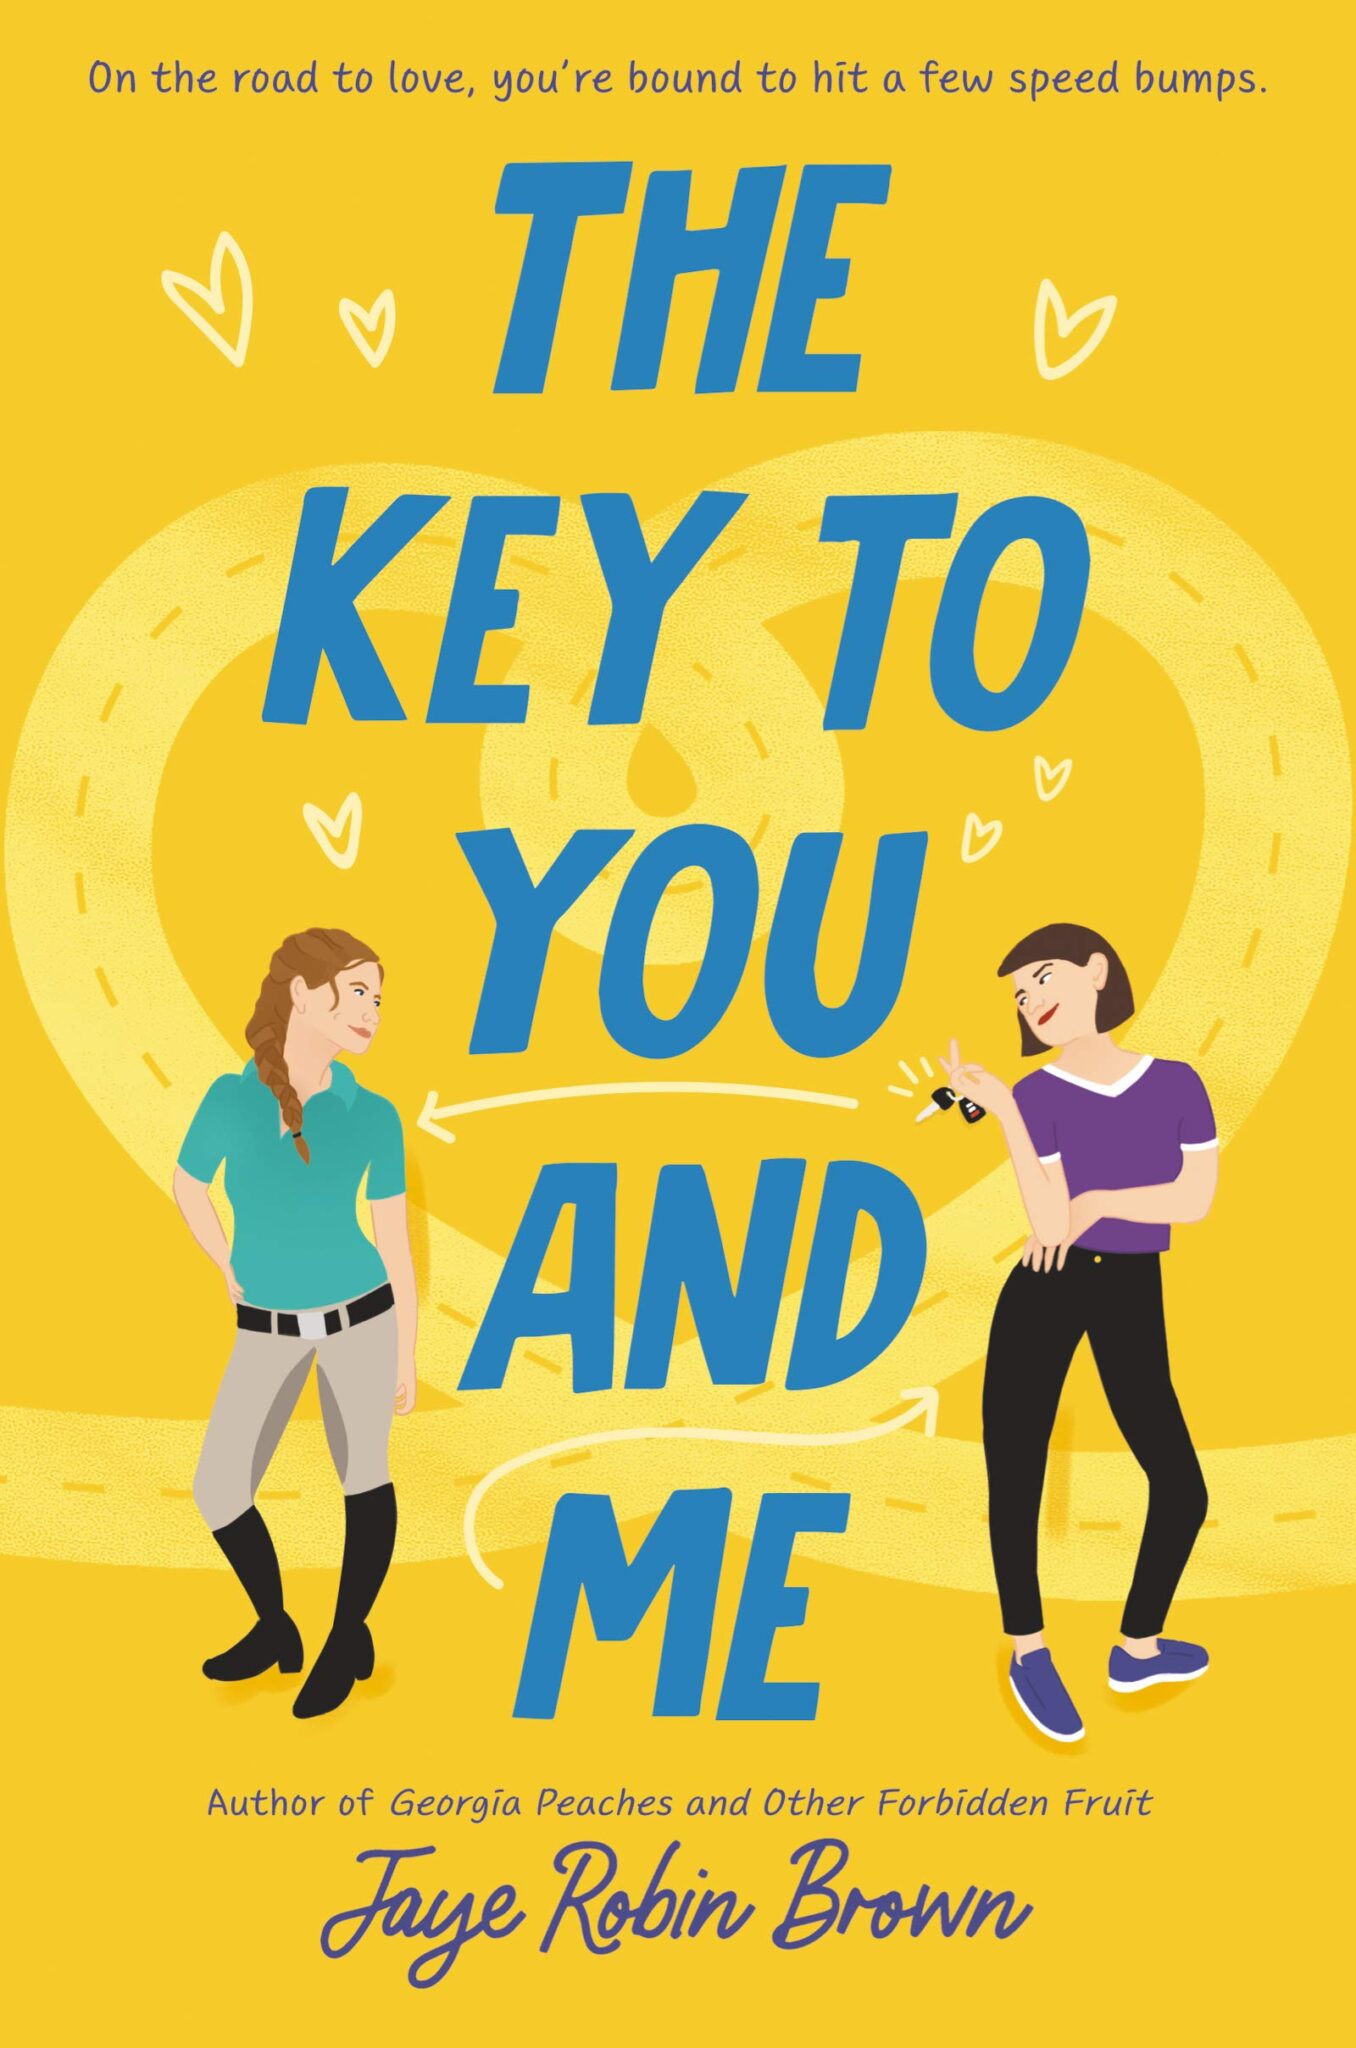 Book Review “the Key To You And Me” By Jaye Robin Brown Mugglenet Book Trolley